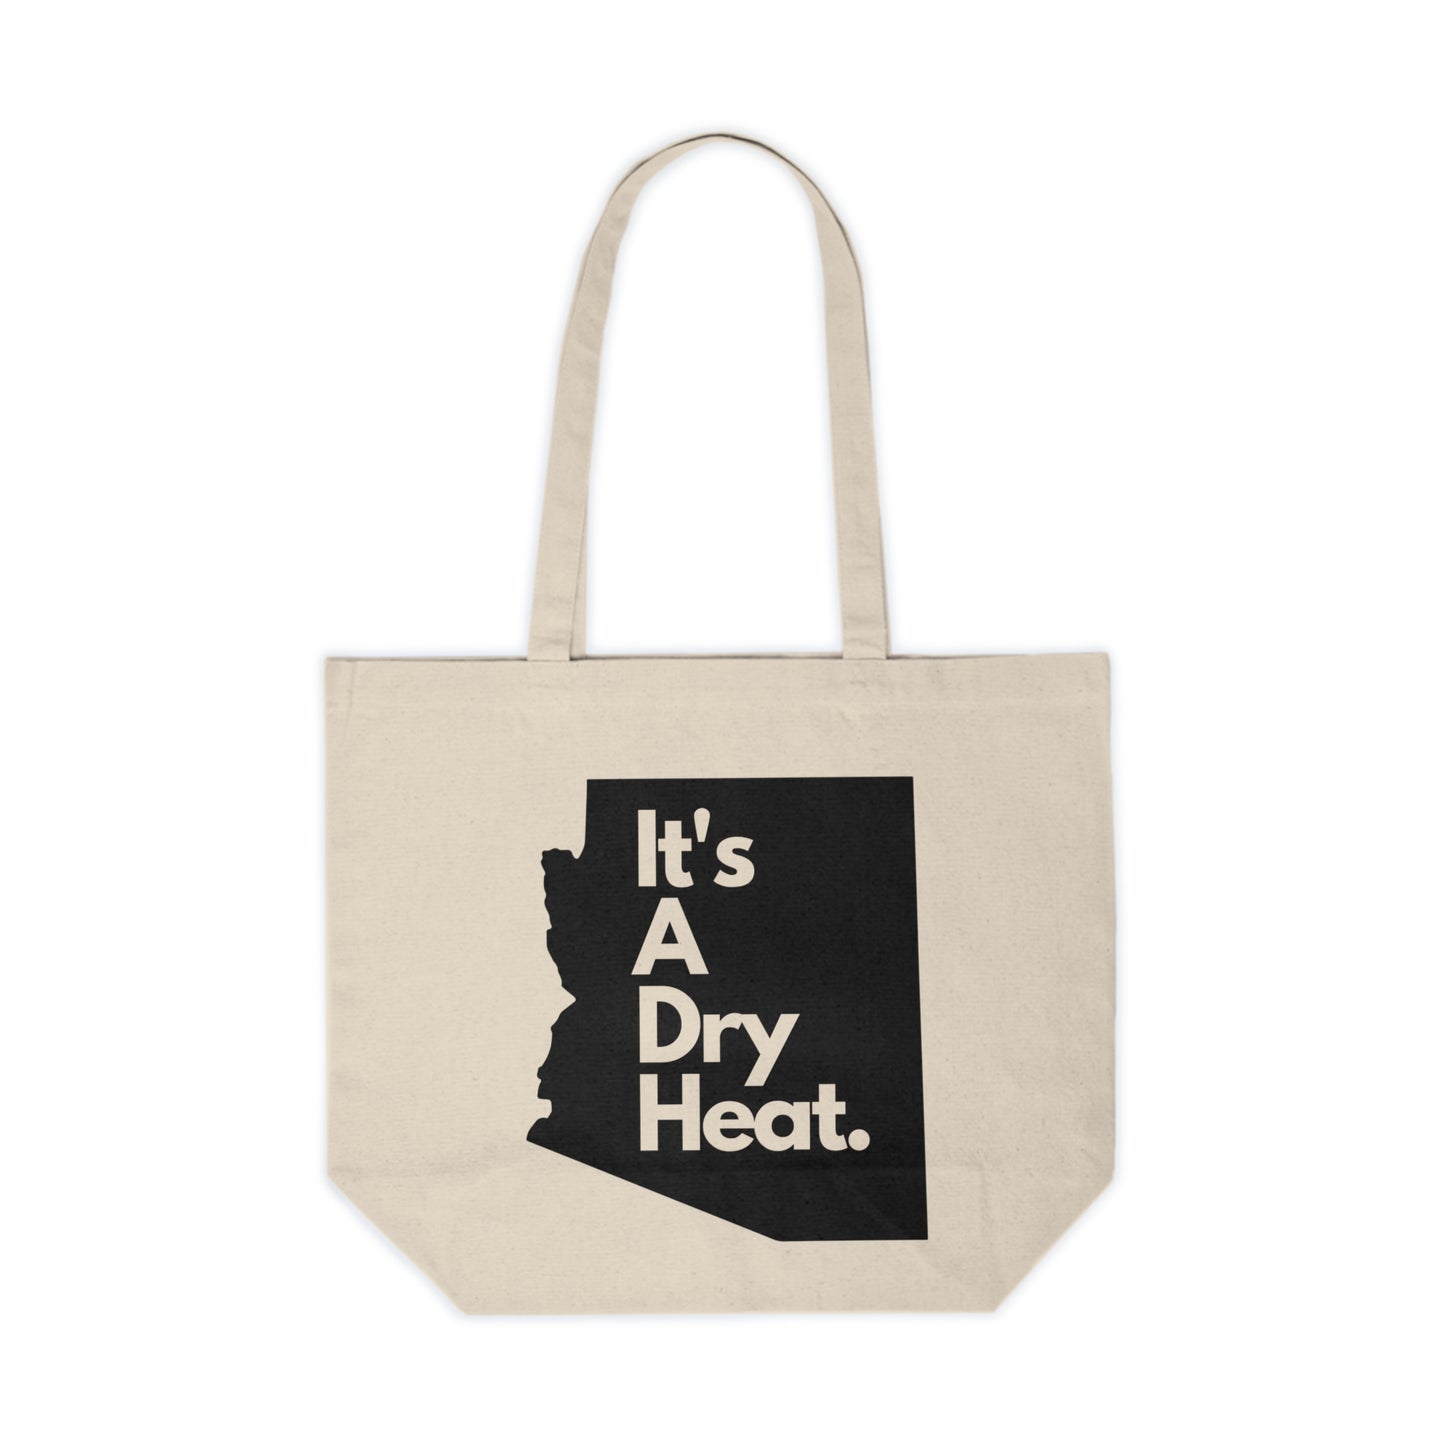 "It's A Dry Heat" Canvas Tote